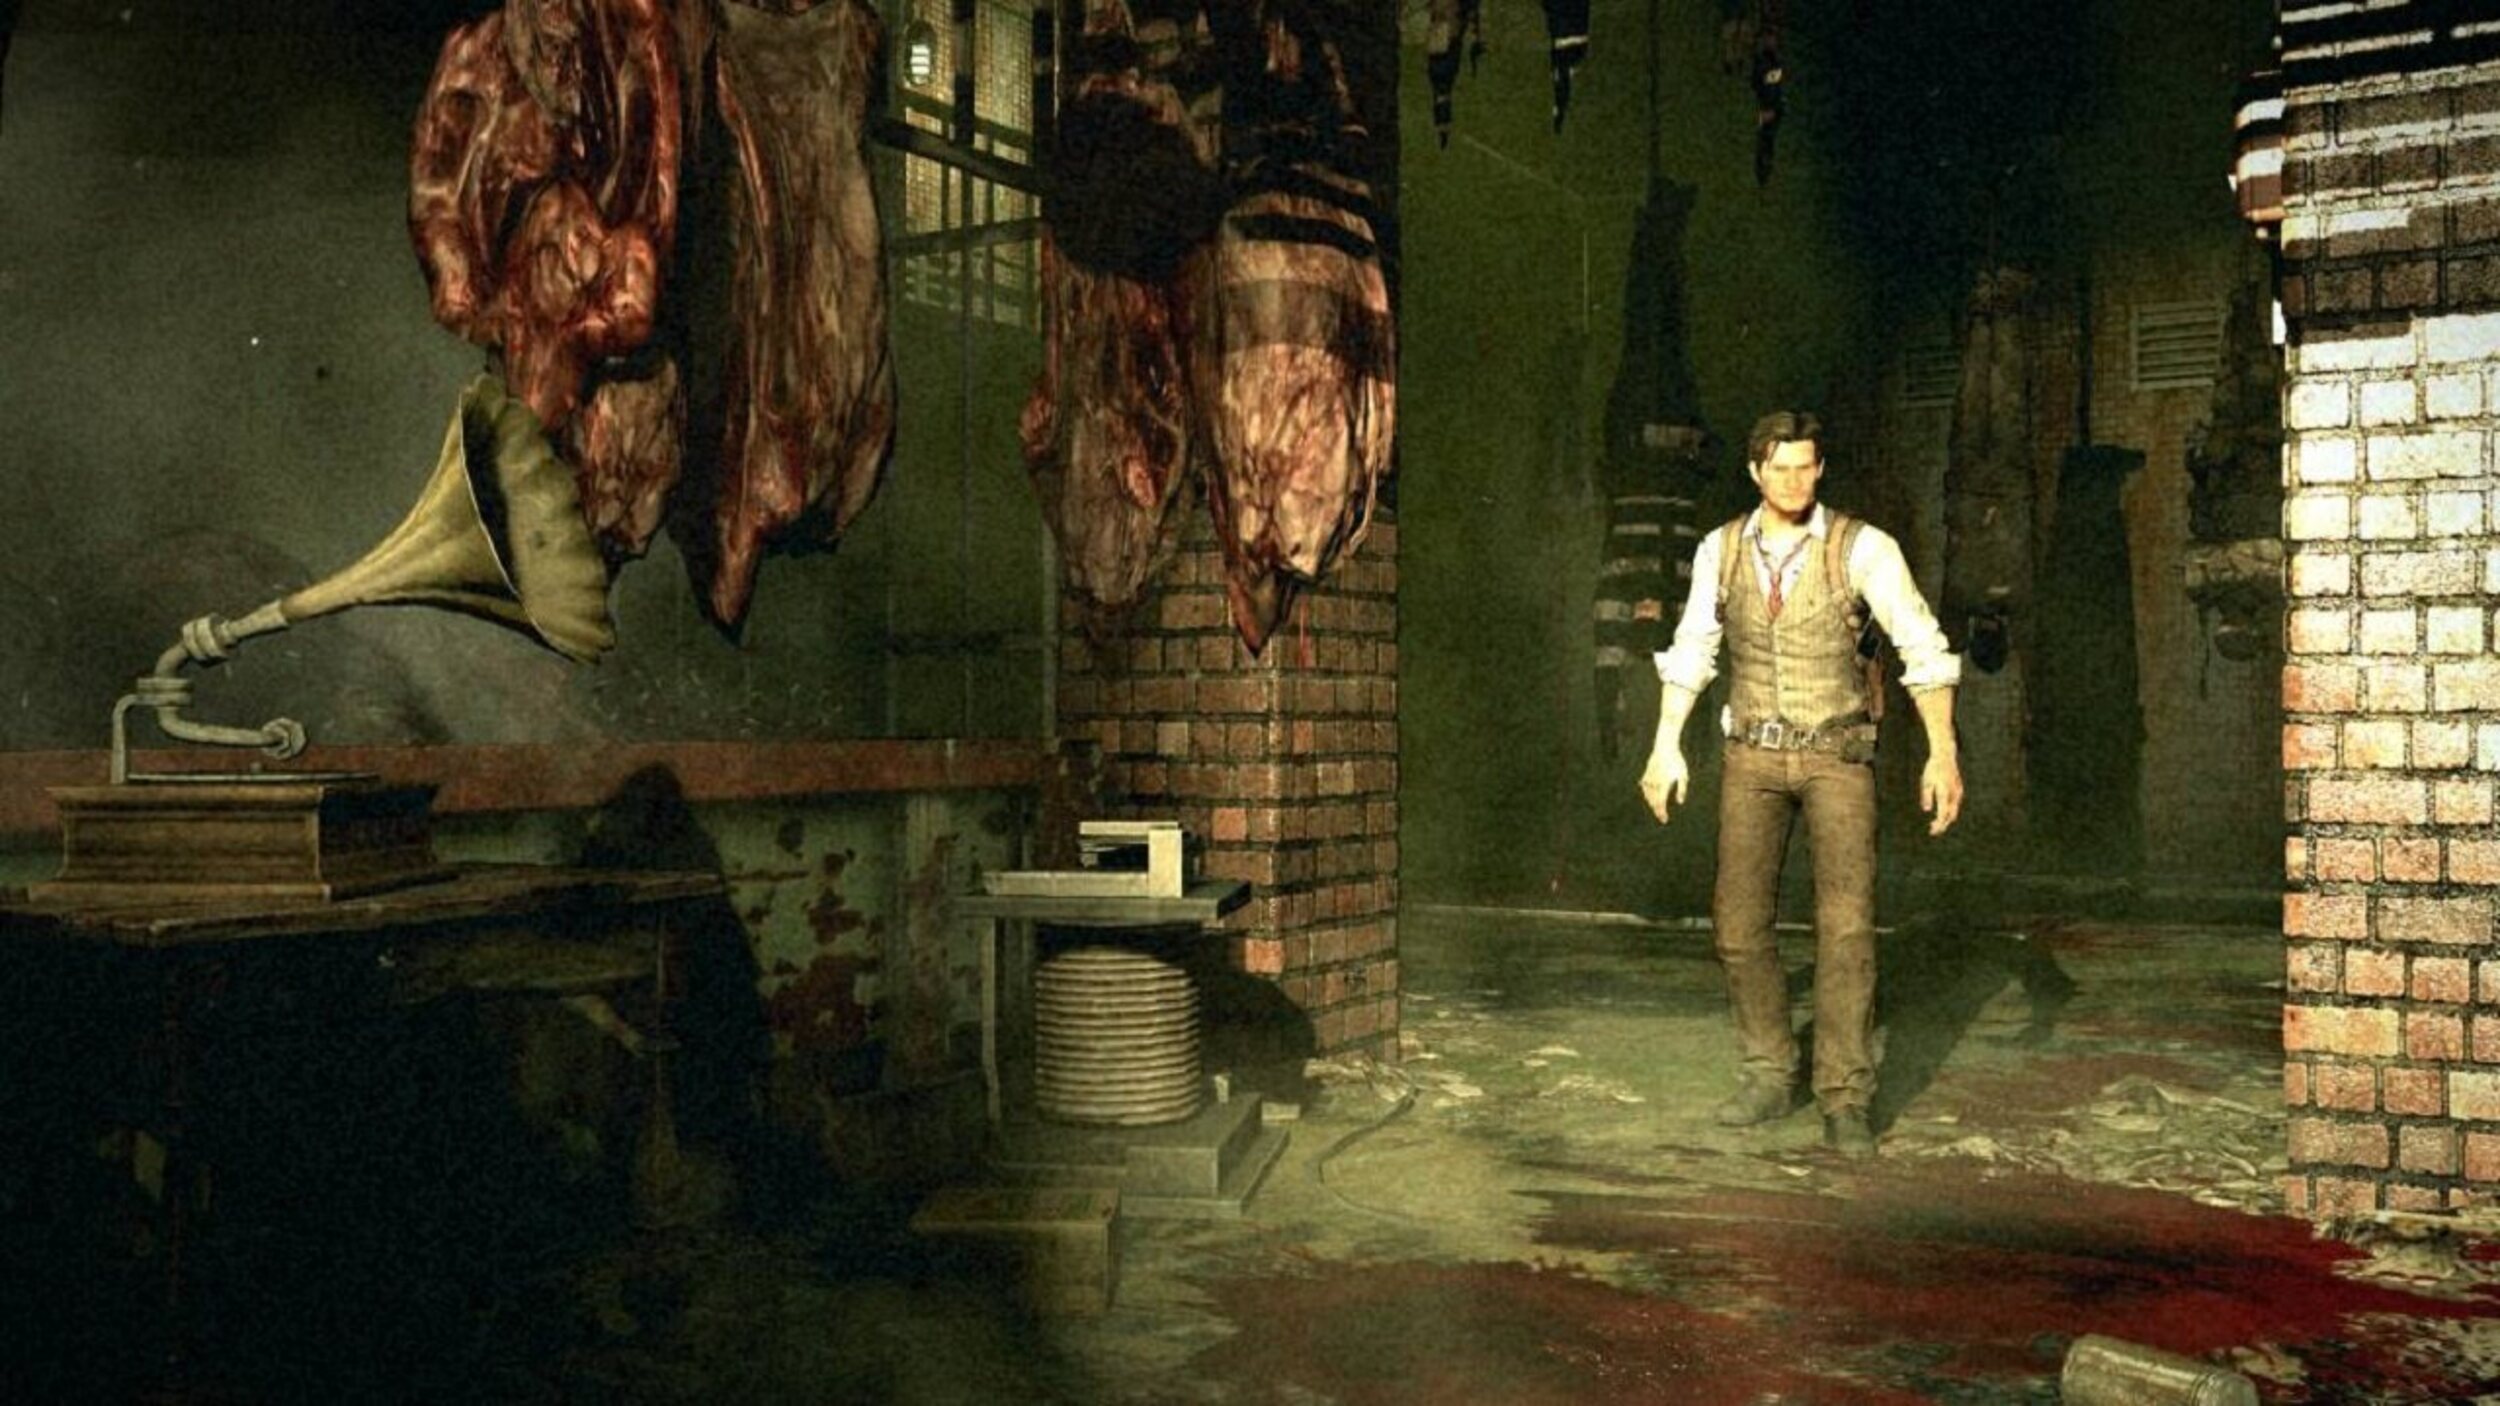 'The Evil Within'